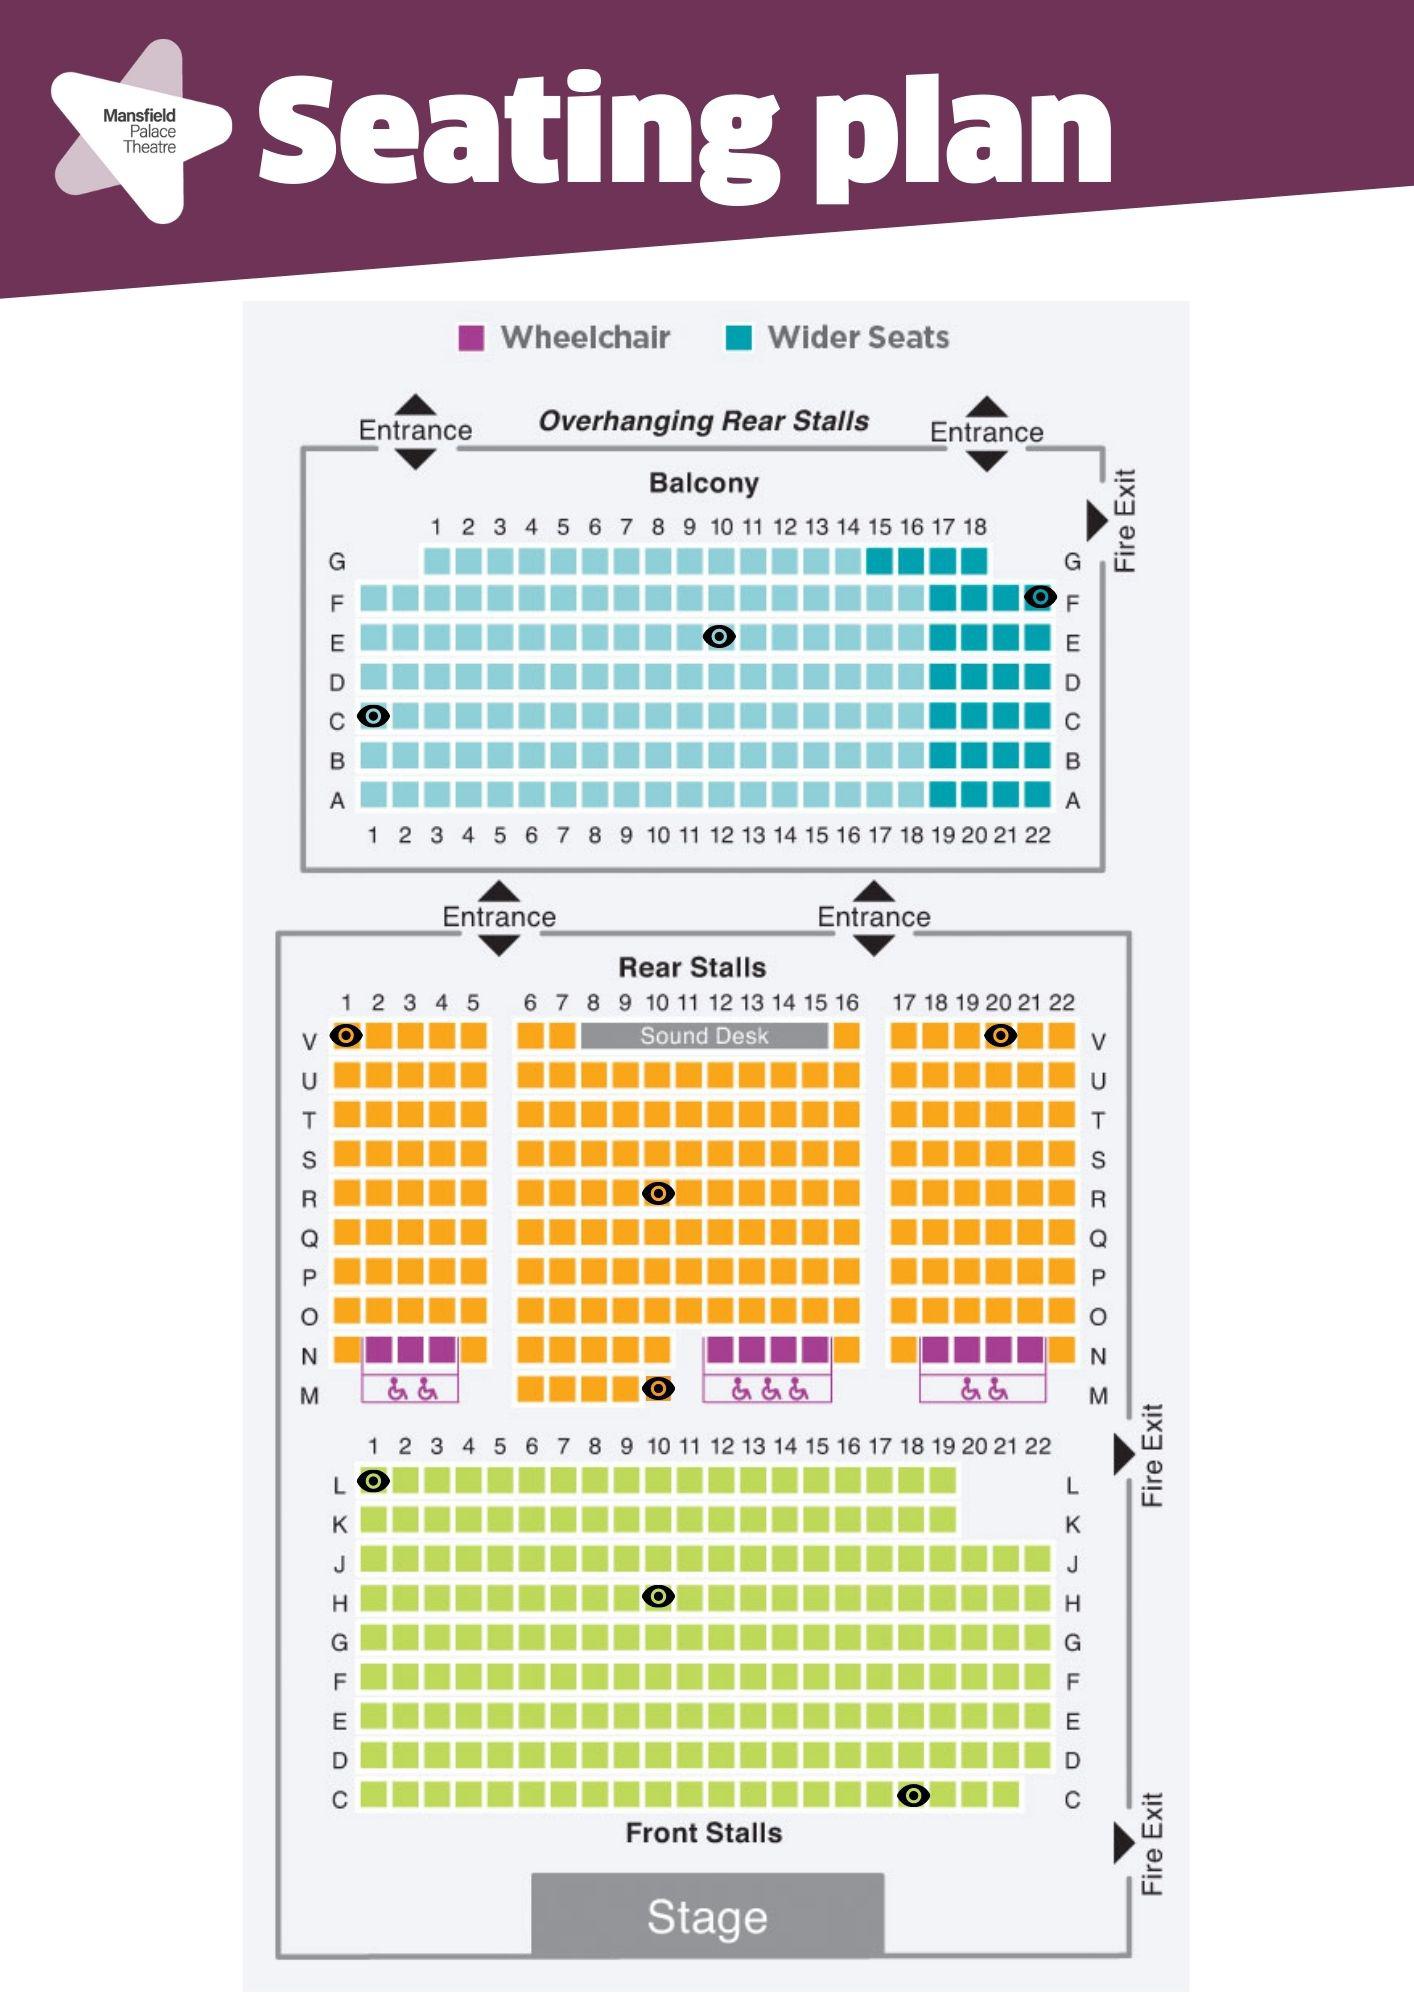 Seating Plan Mansfield Palace Theatre